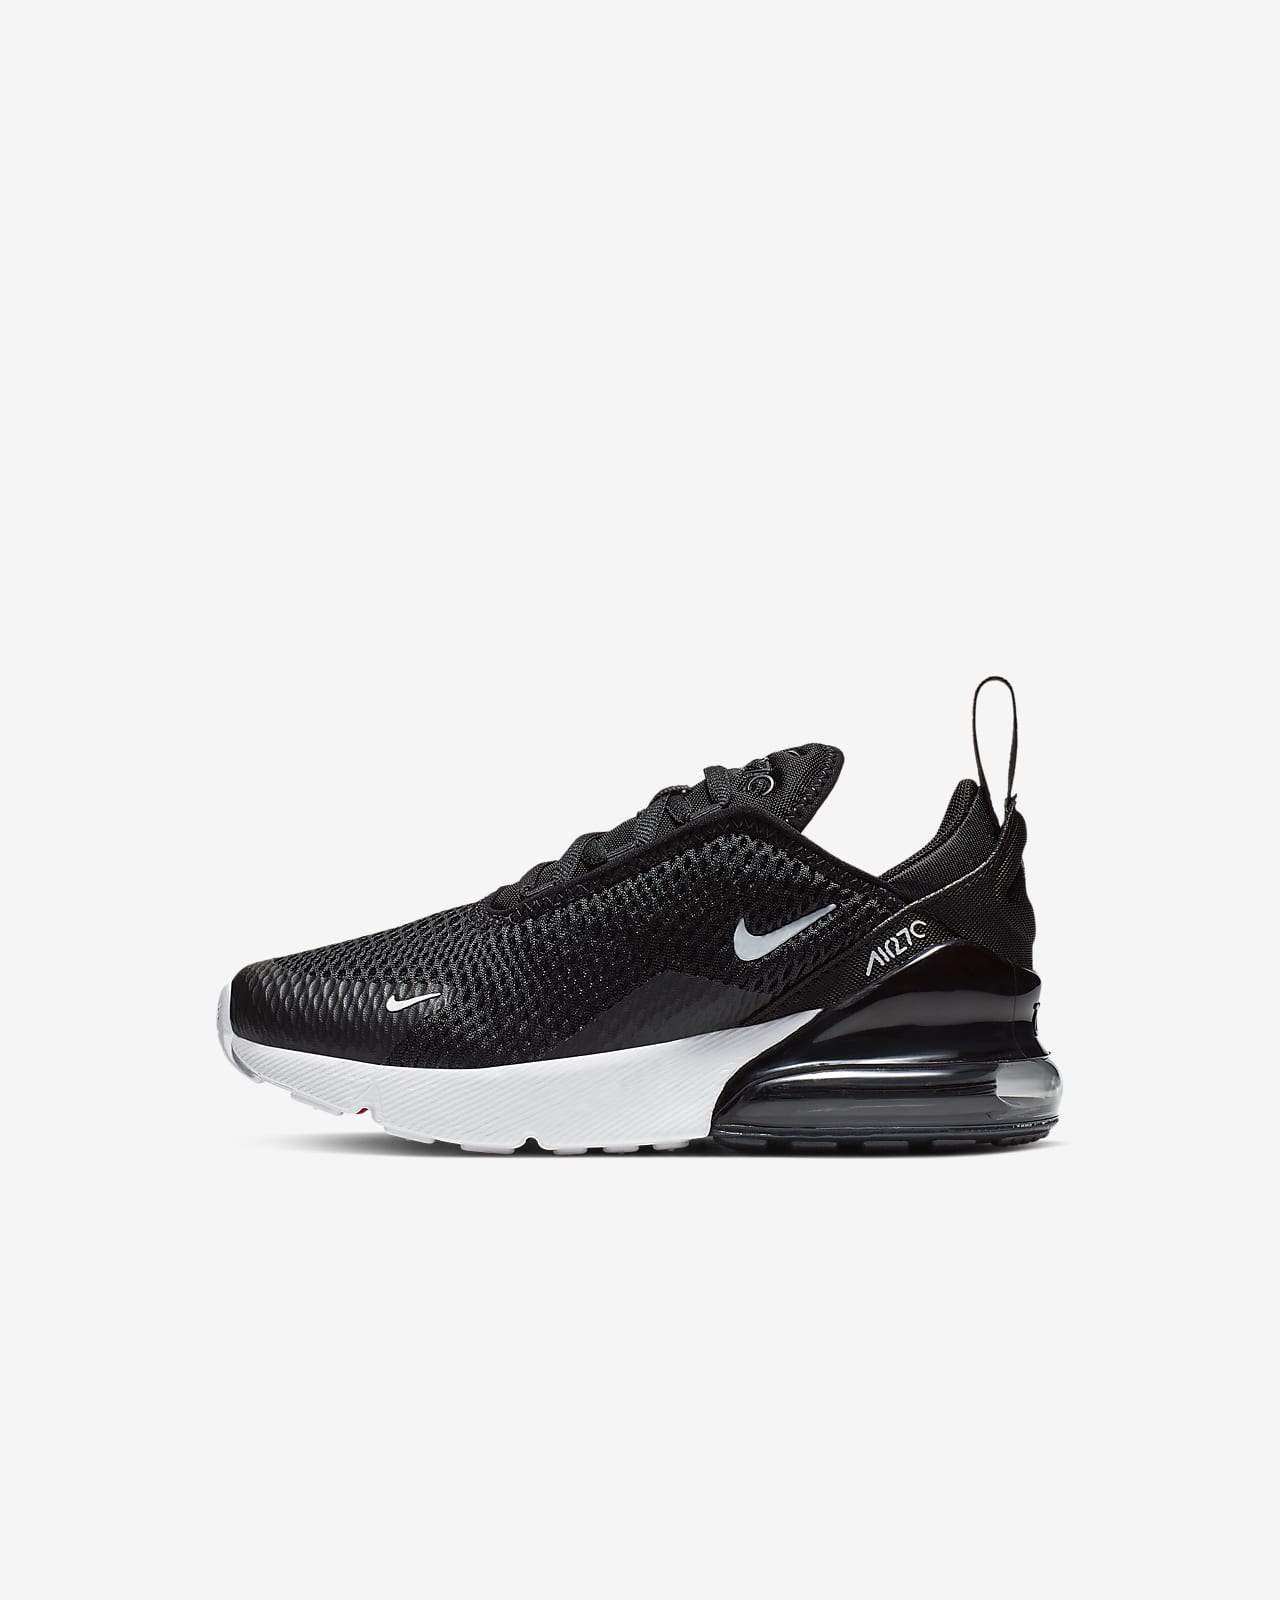 nike air max 270s black and white